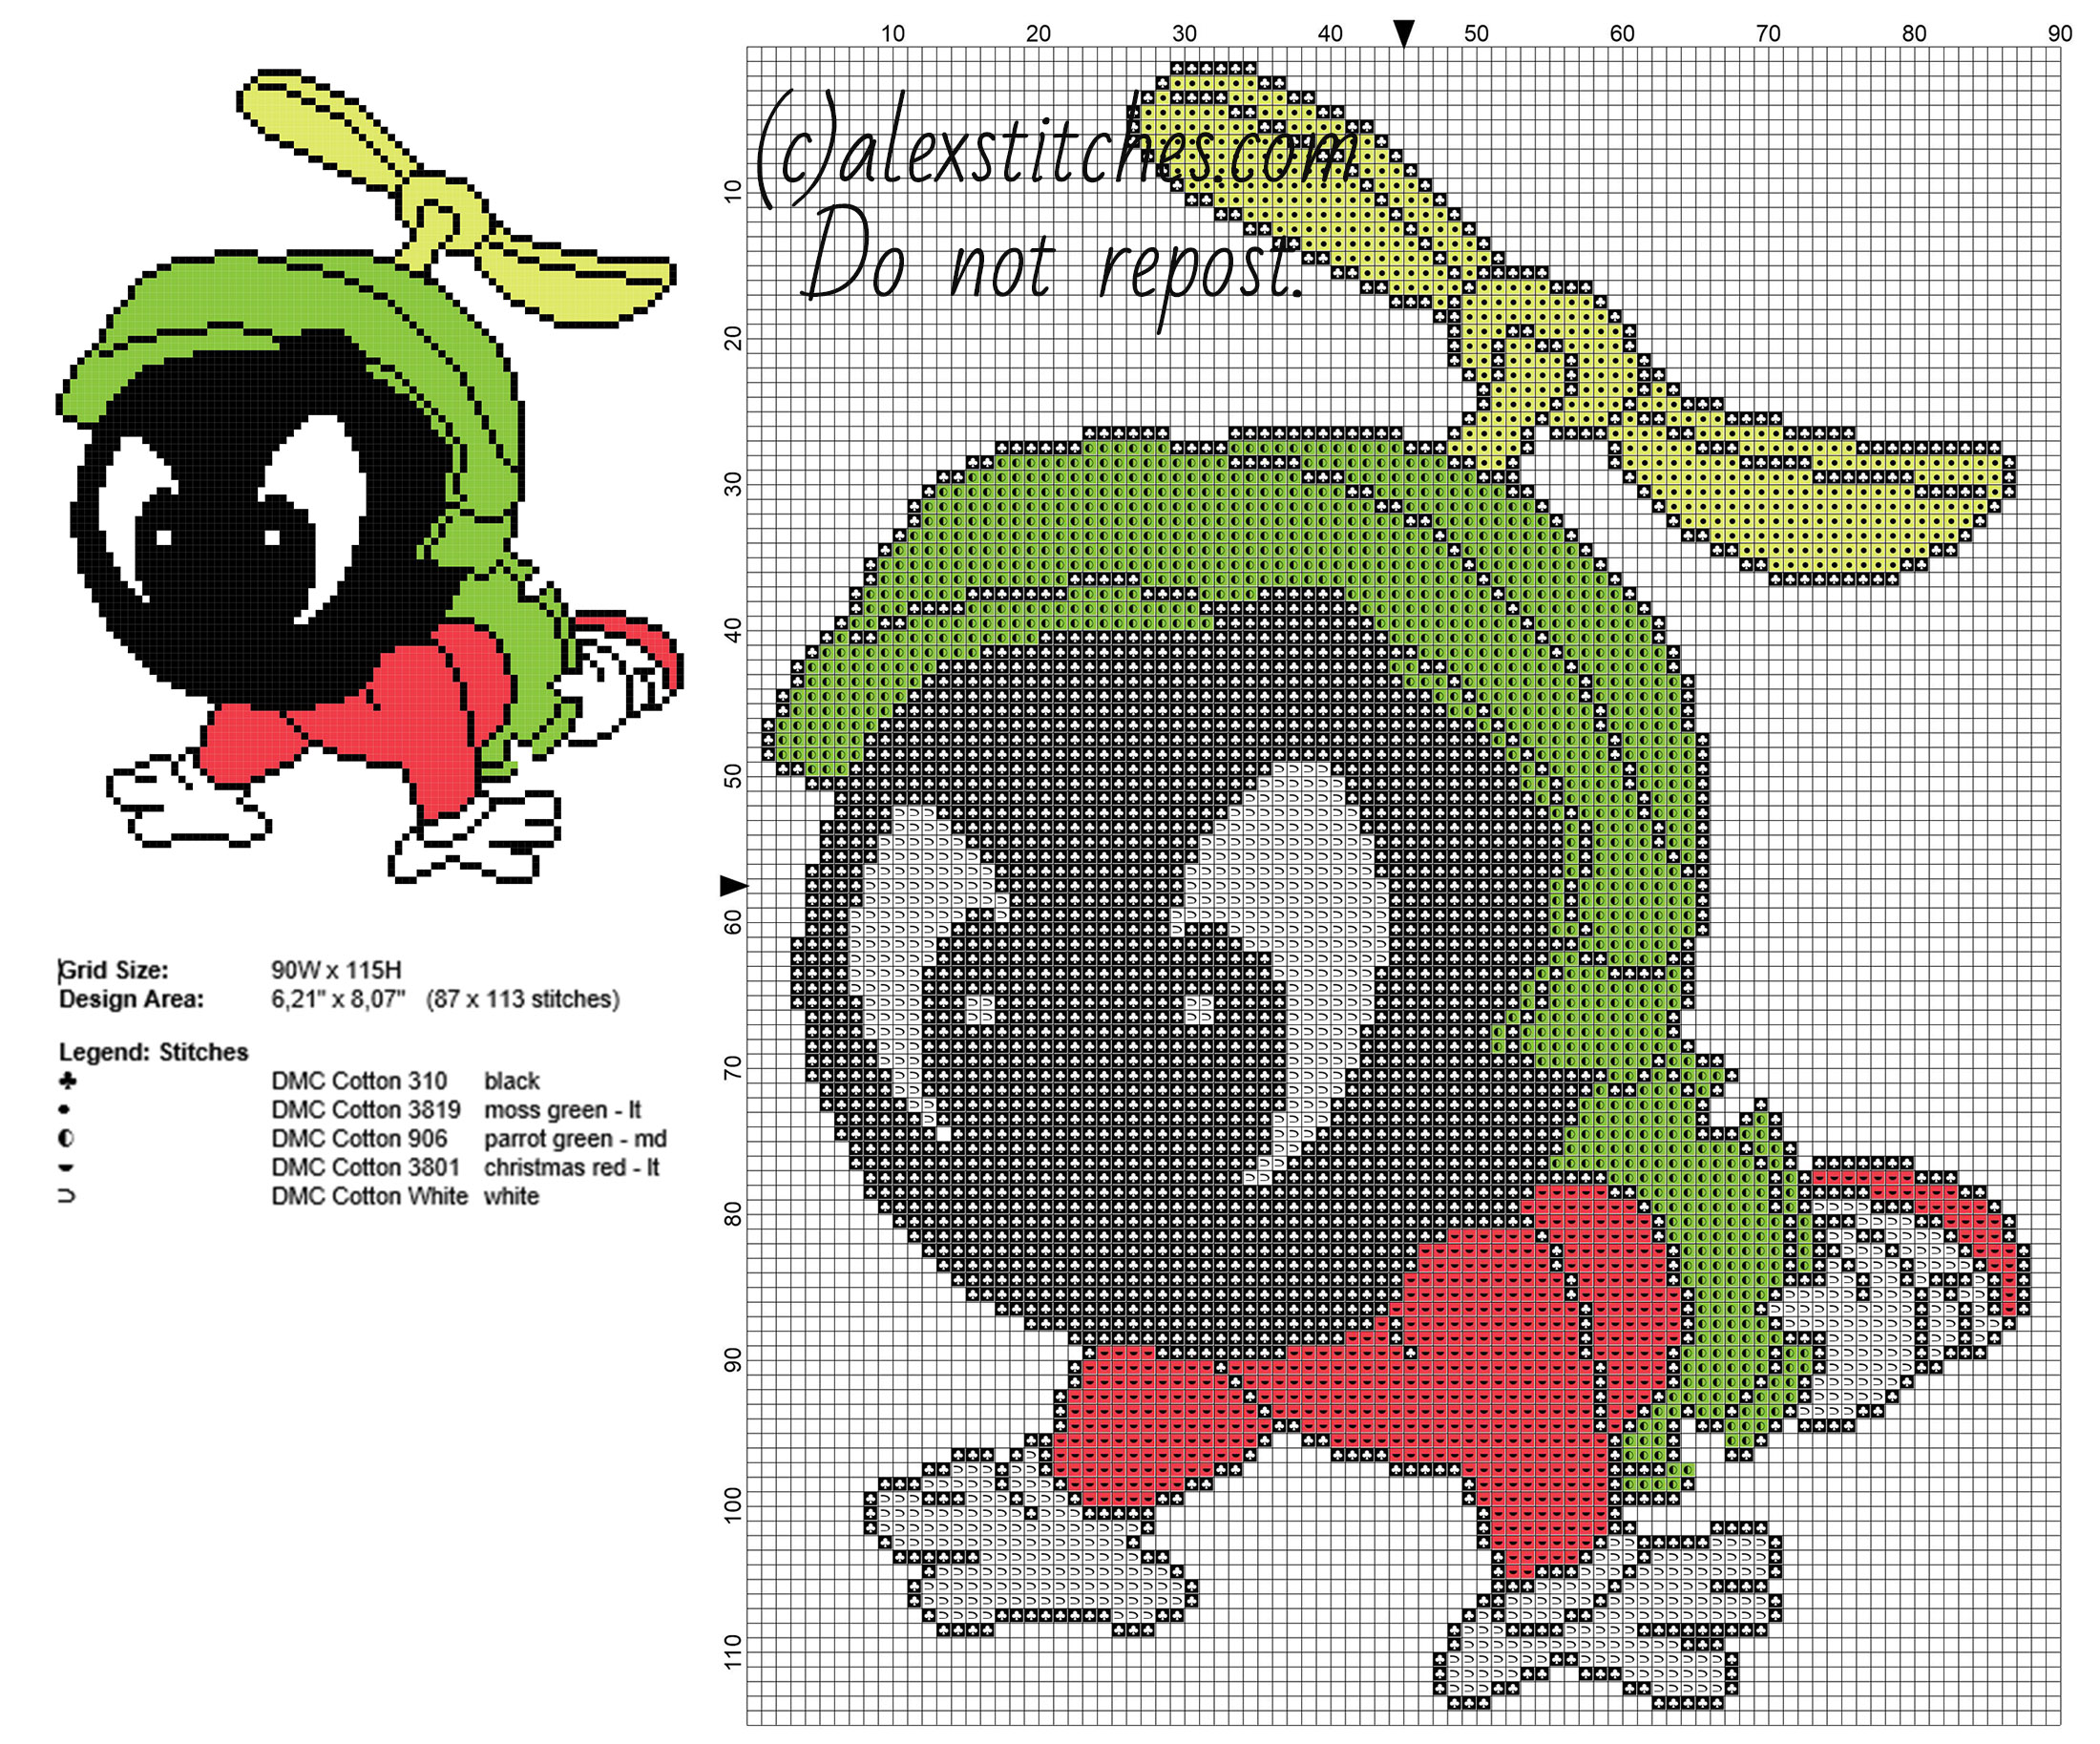 Baby Marvin The Martian Looney Tunes character free cross stitch pattern 87 x 113 5 colors